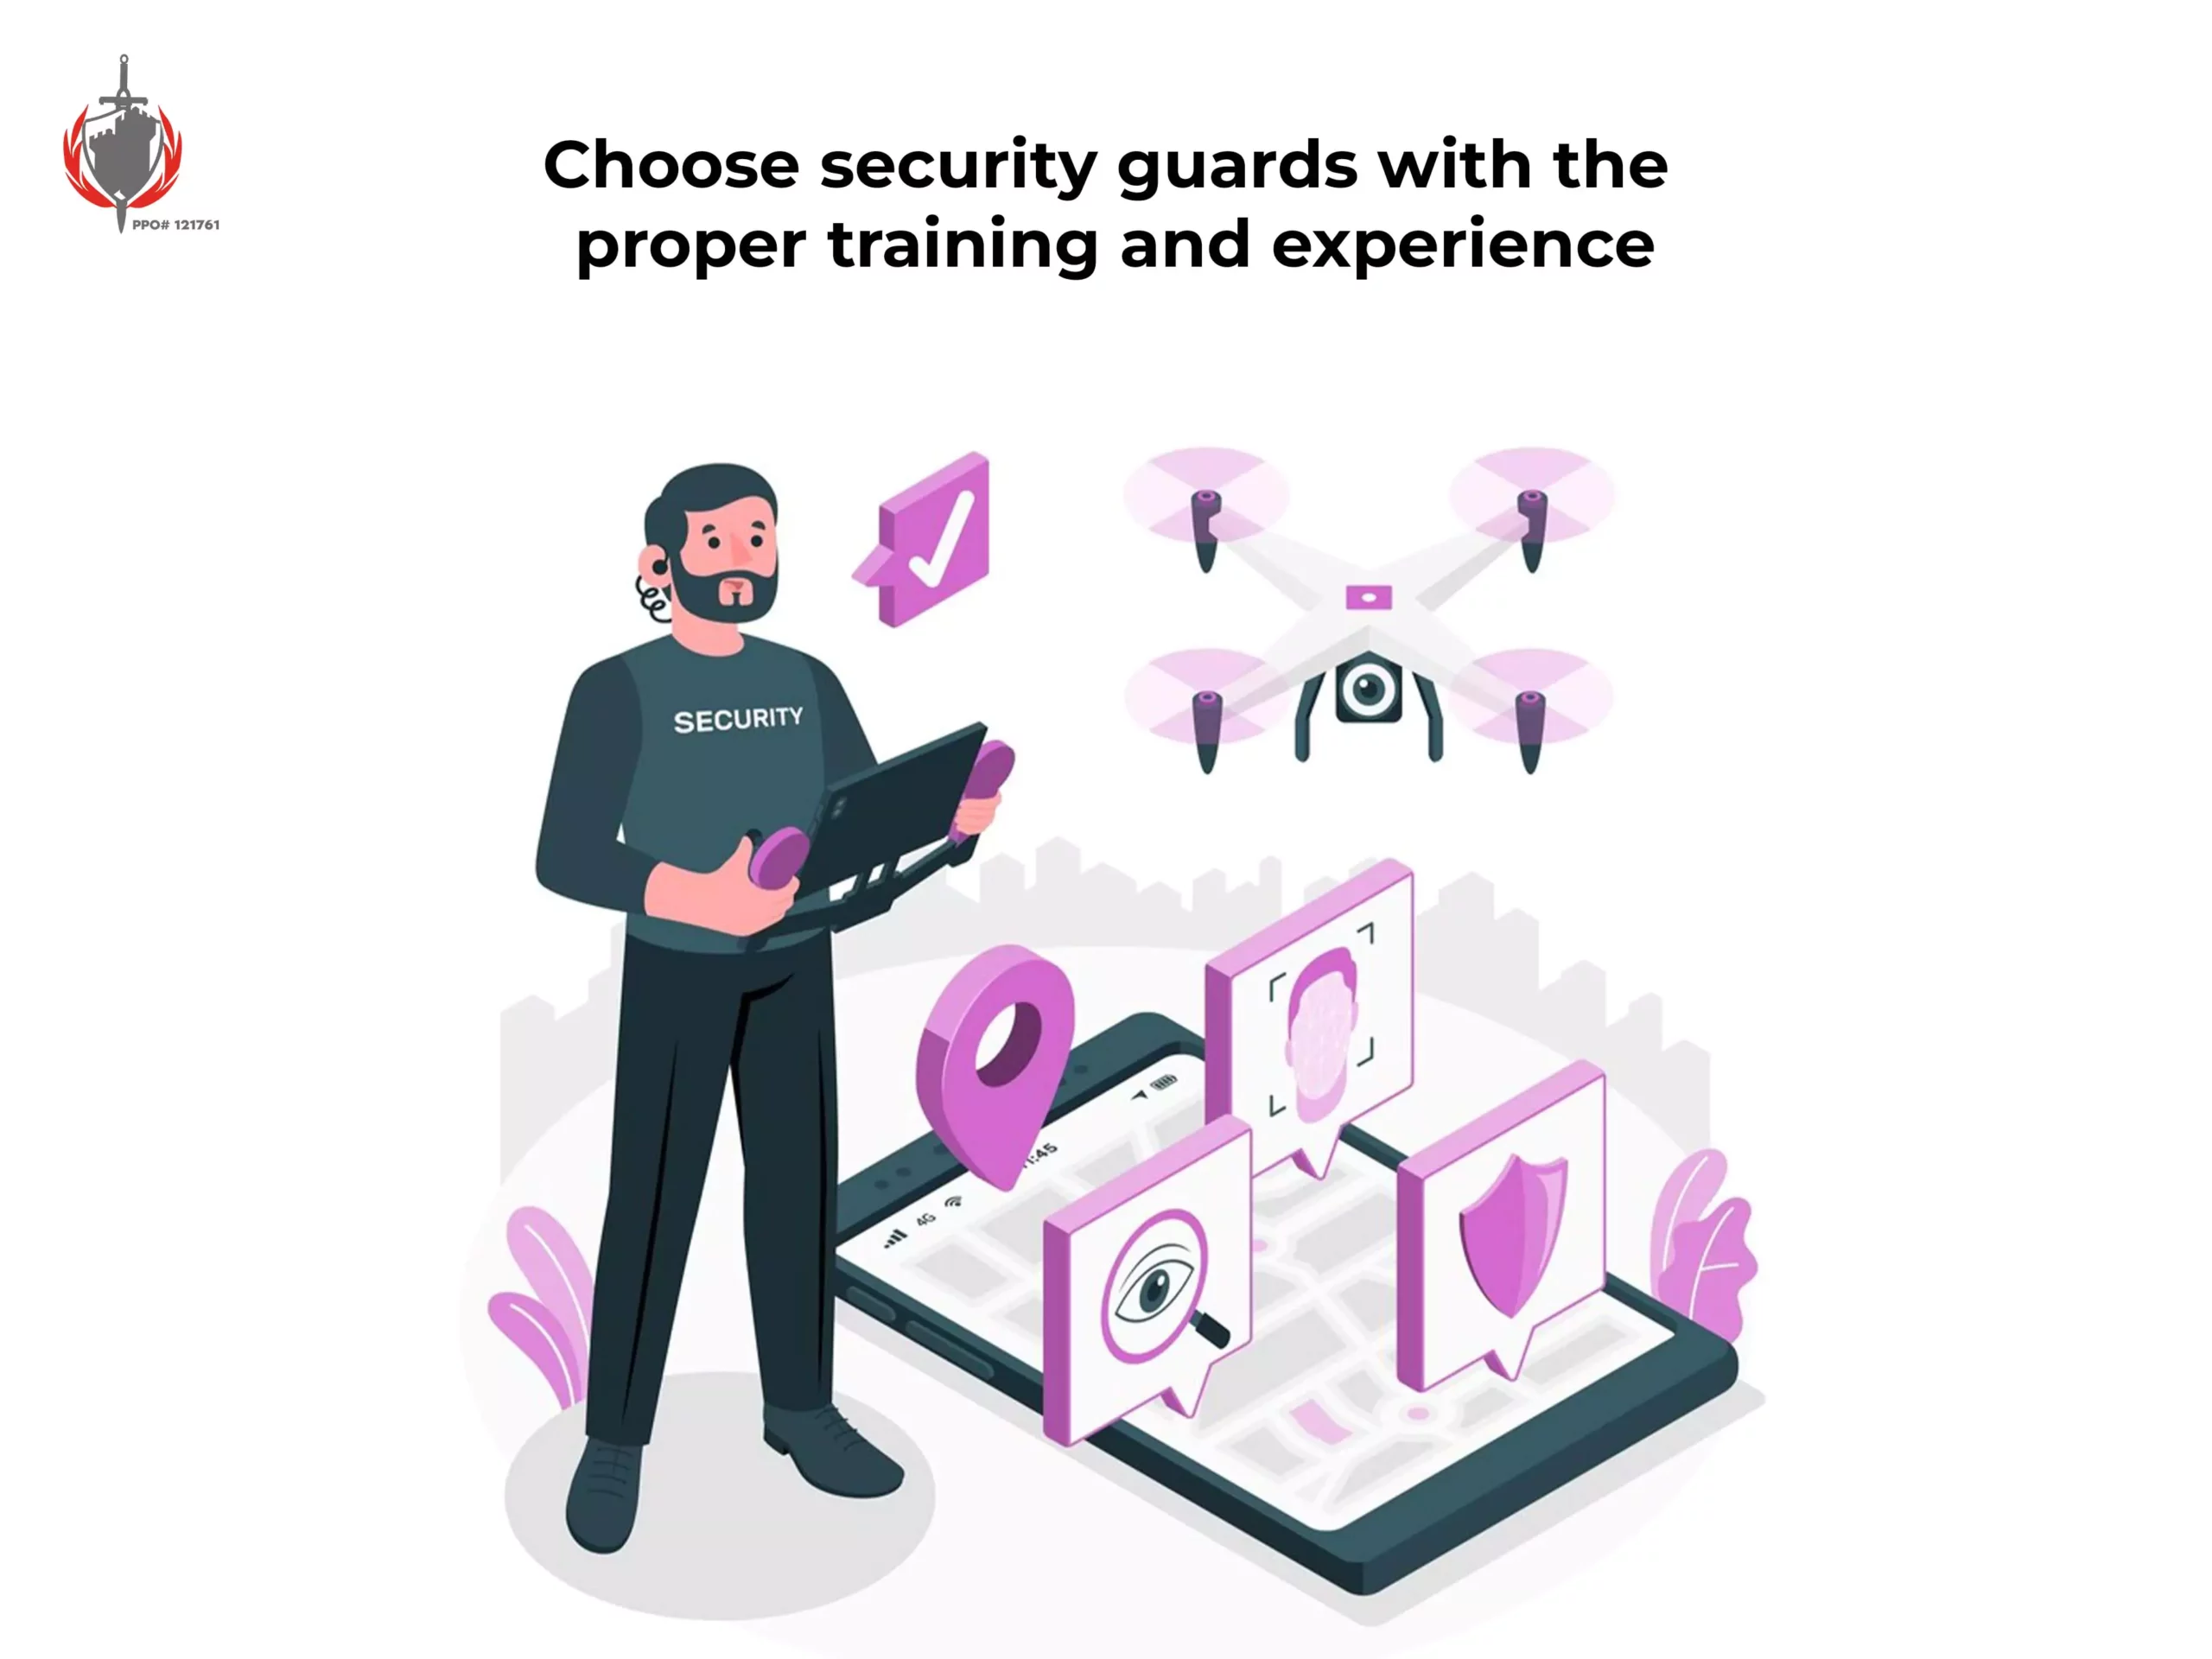 Choose security guards with the proper training and experience